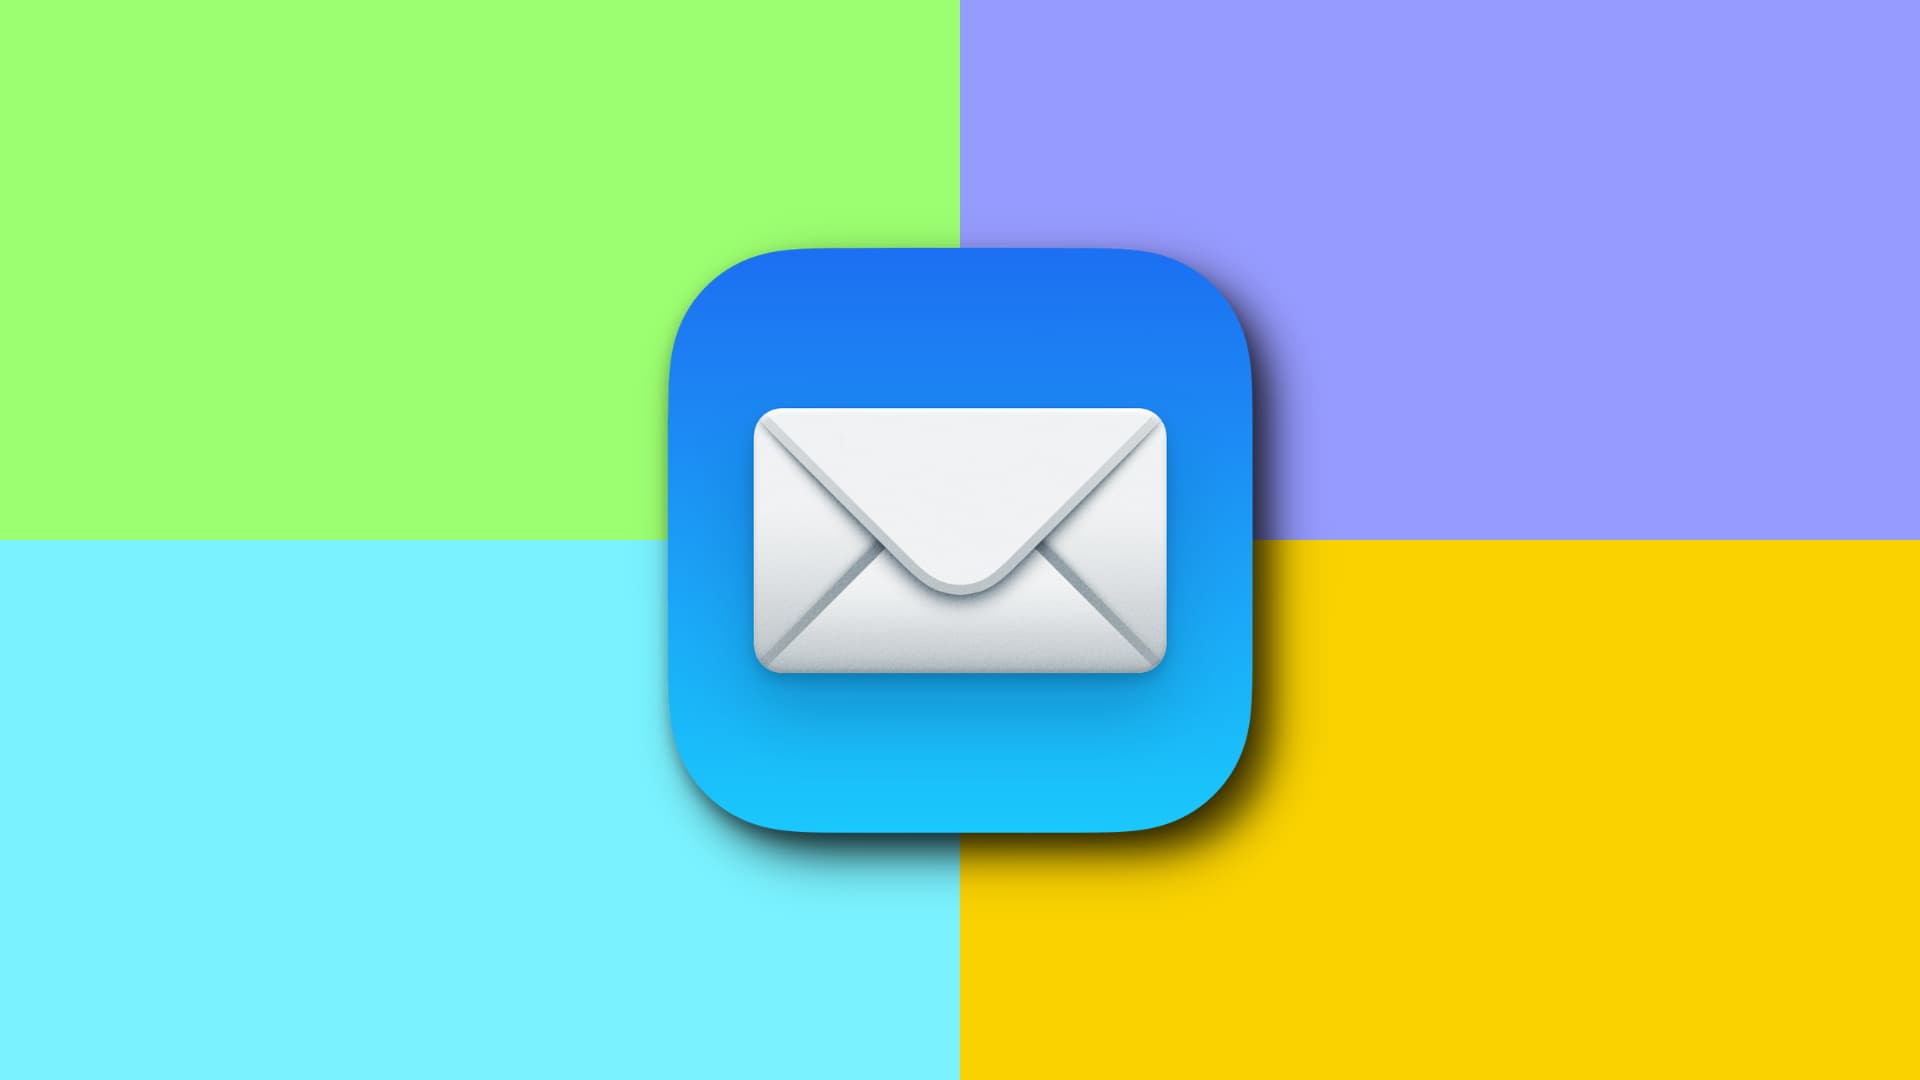 Apple Mail app icon on a colorful background